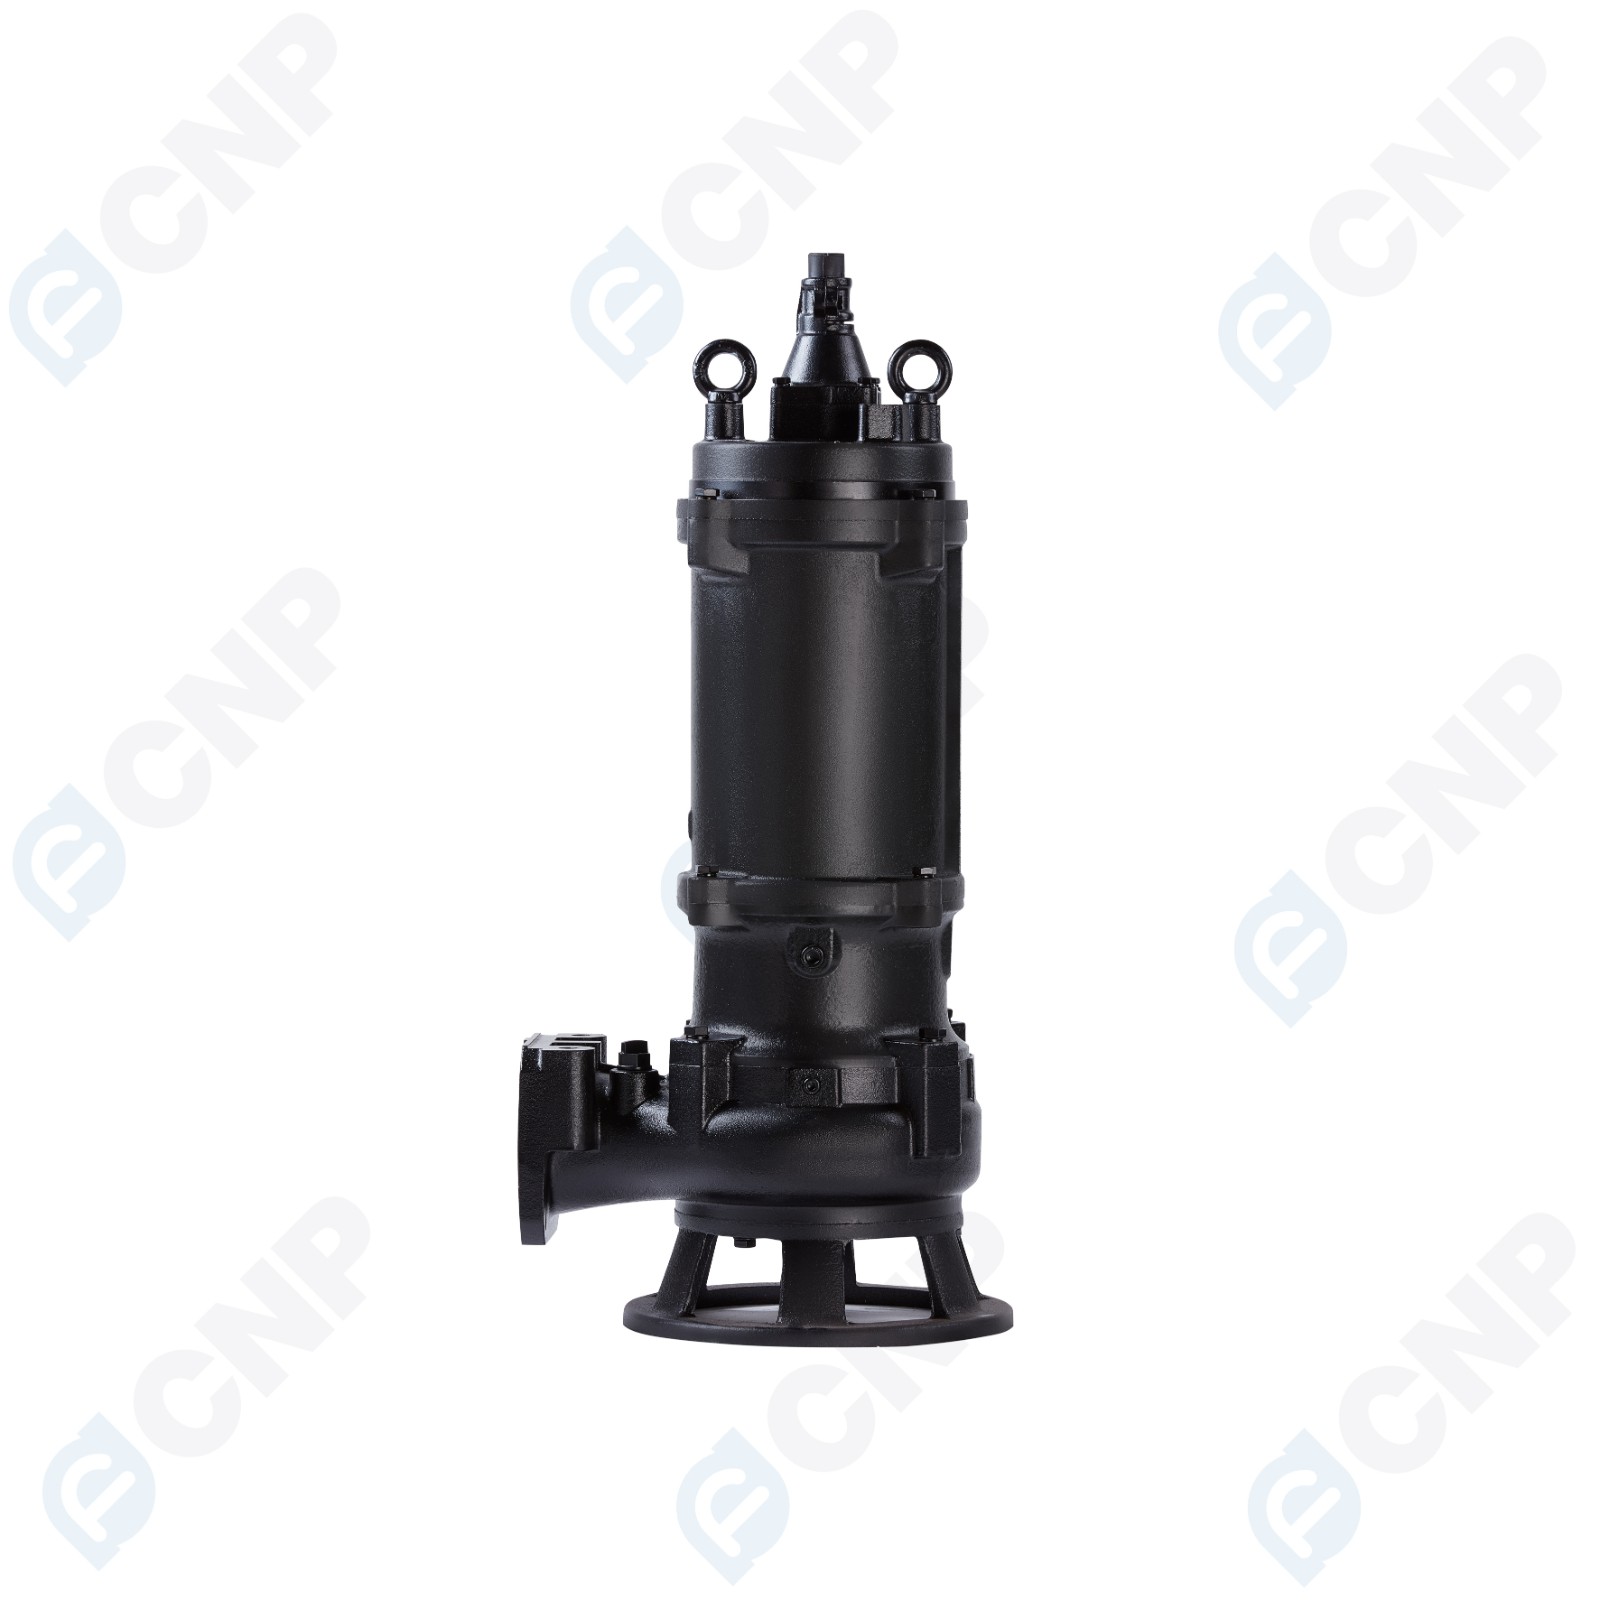 SJ Multistage Deep-well Submersible Pump